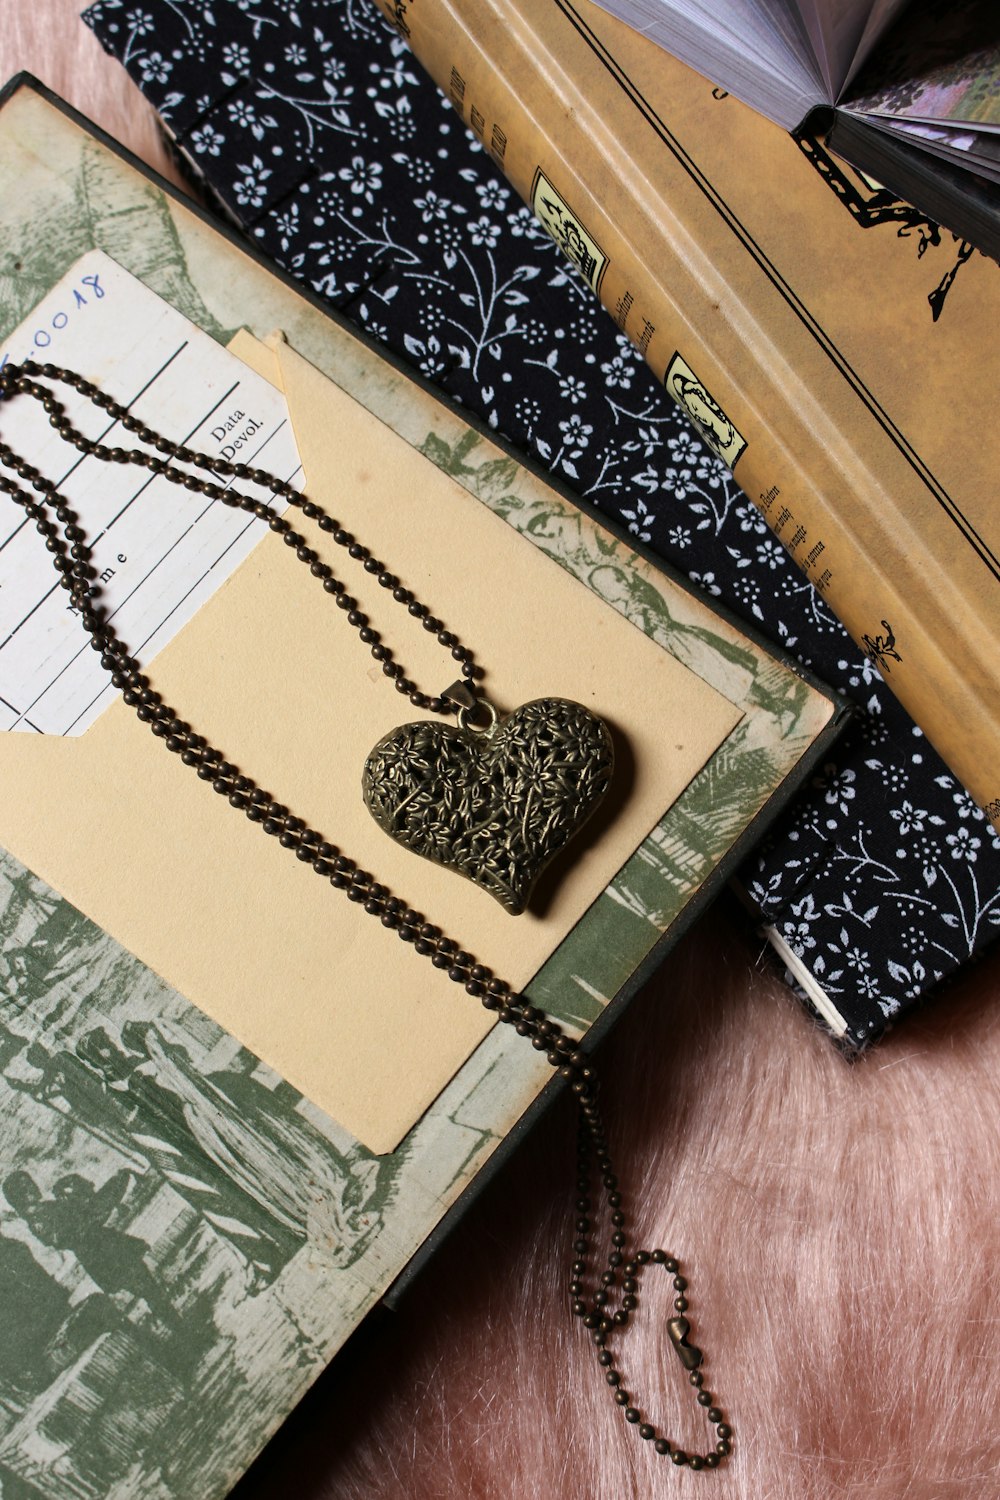 a book with a heart shaped pendant on it